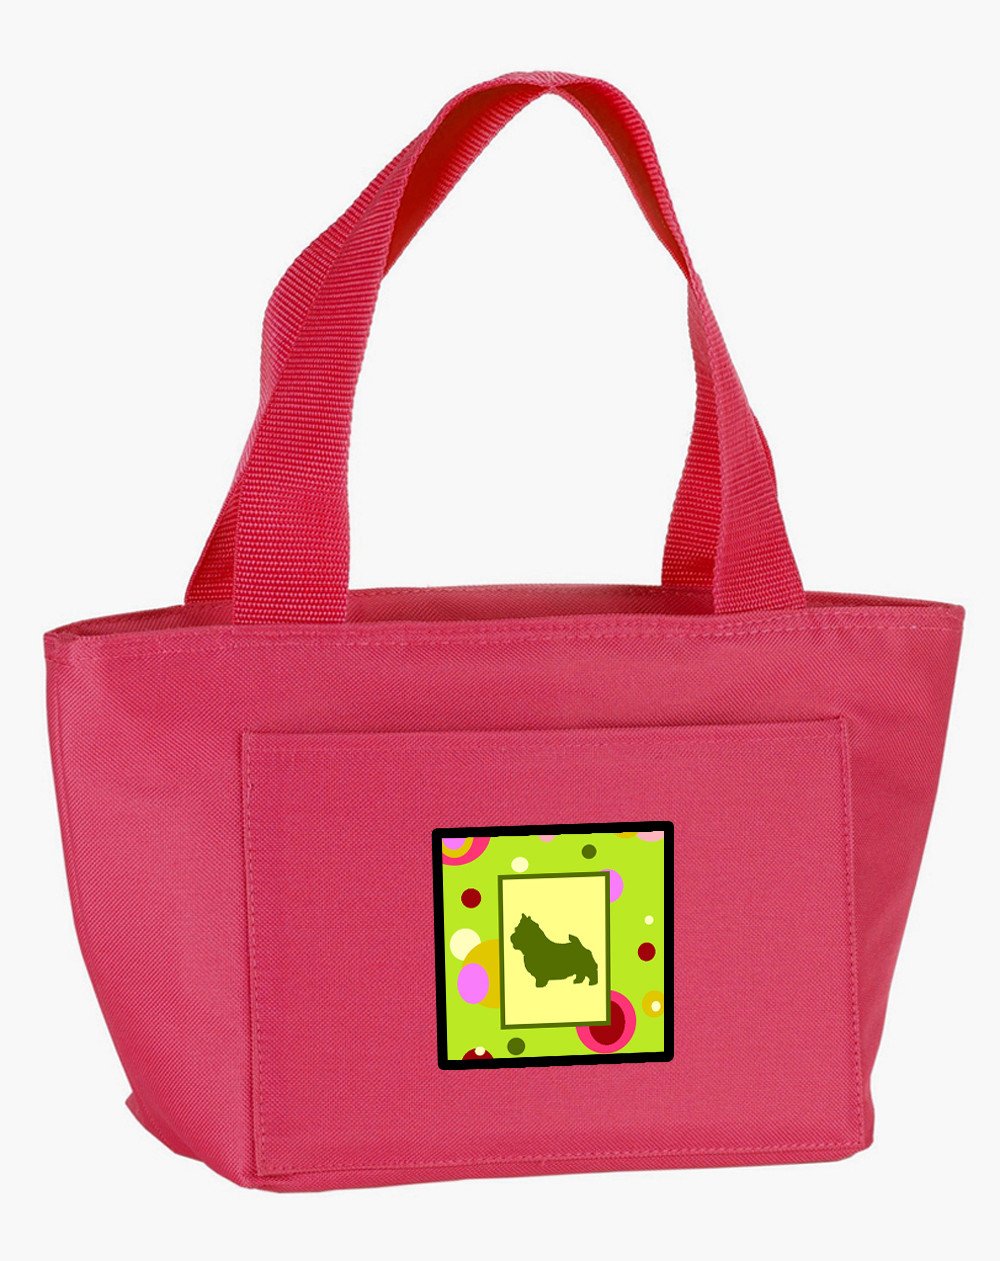 Lime Green Dots Norwich Terrier Lunch Bag CK1048PK-8808 by Caroline's Treasures